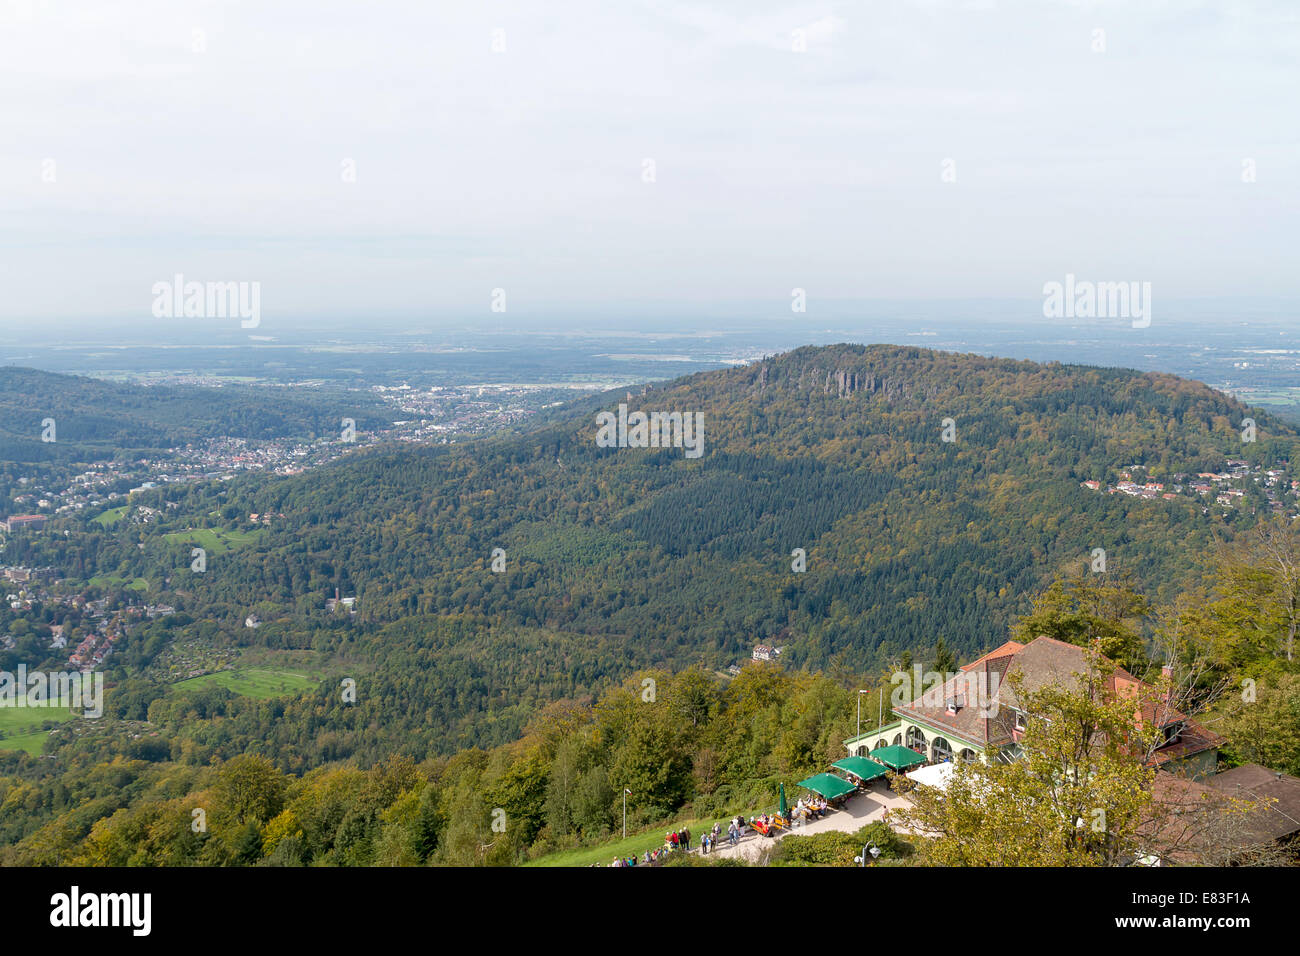 Summit Merkur Baden Baden Germany High Resolution Stock Photography and  Images - Alamy